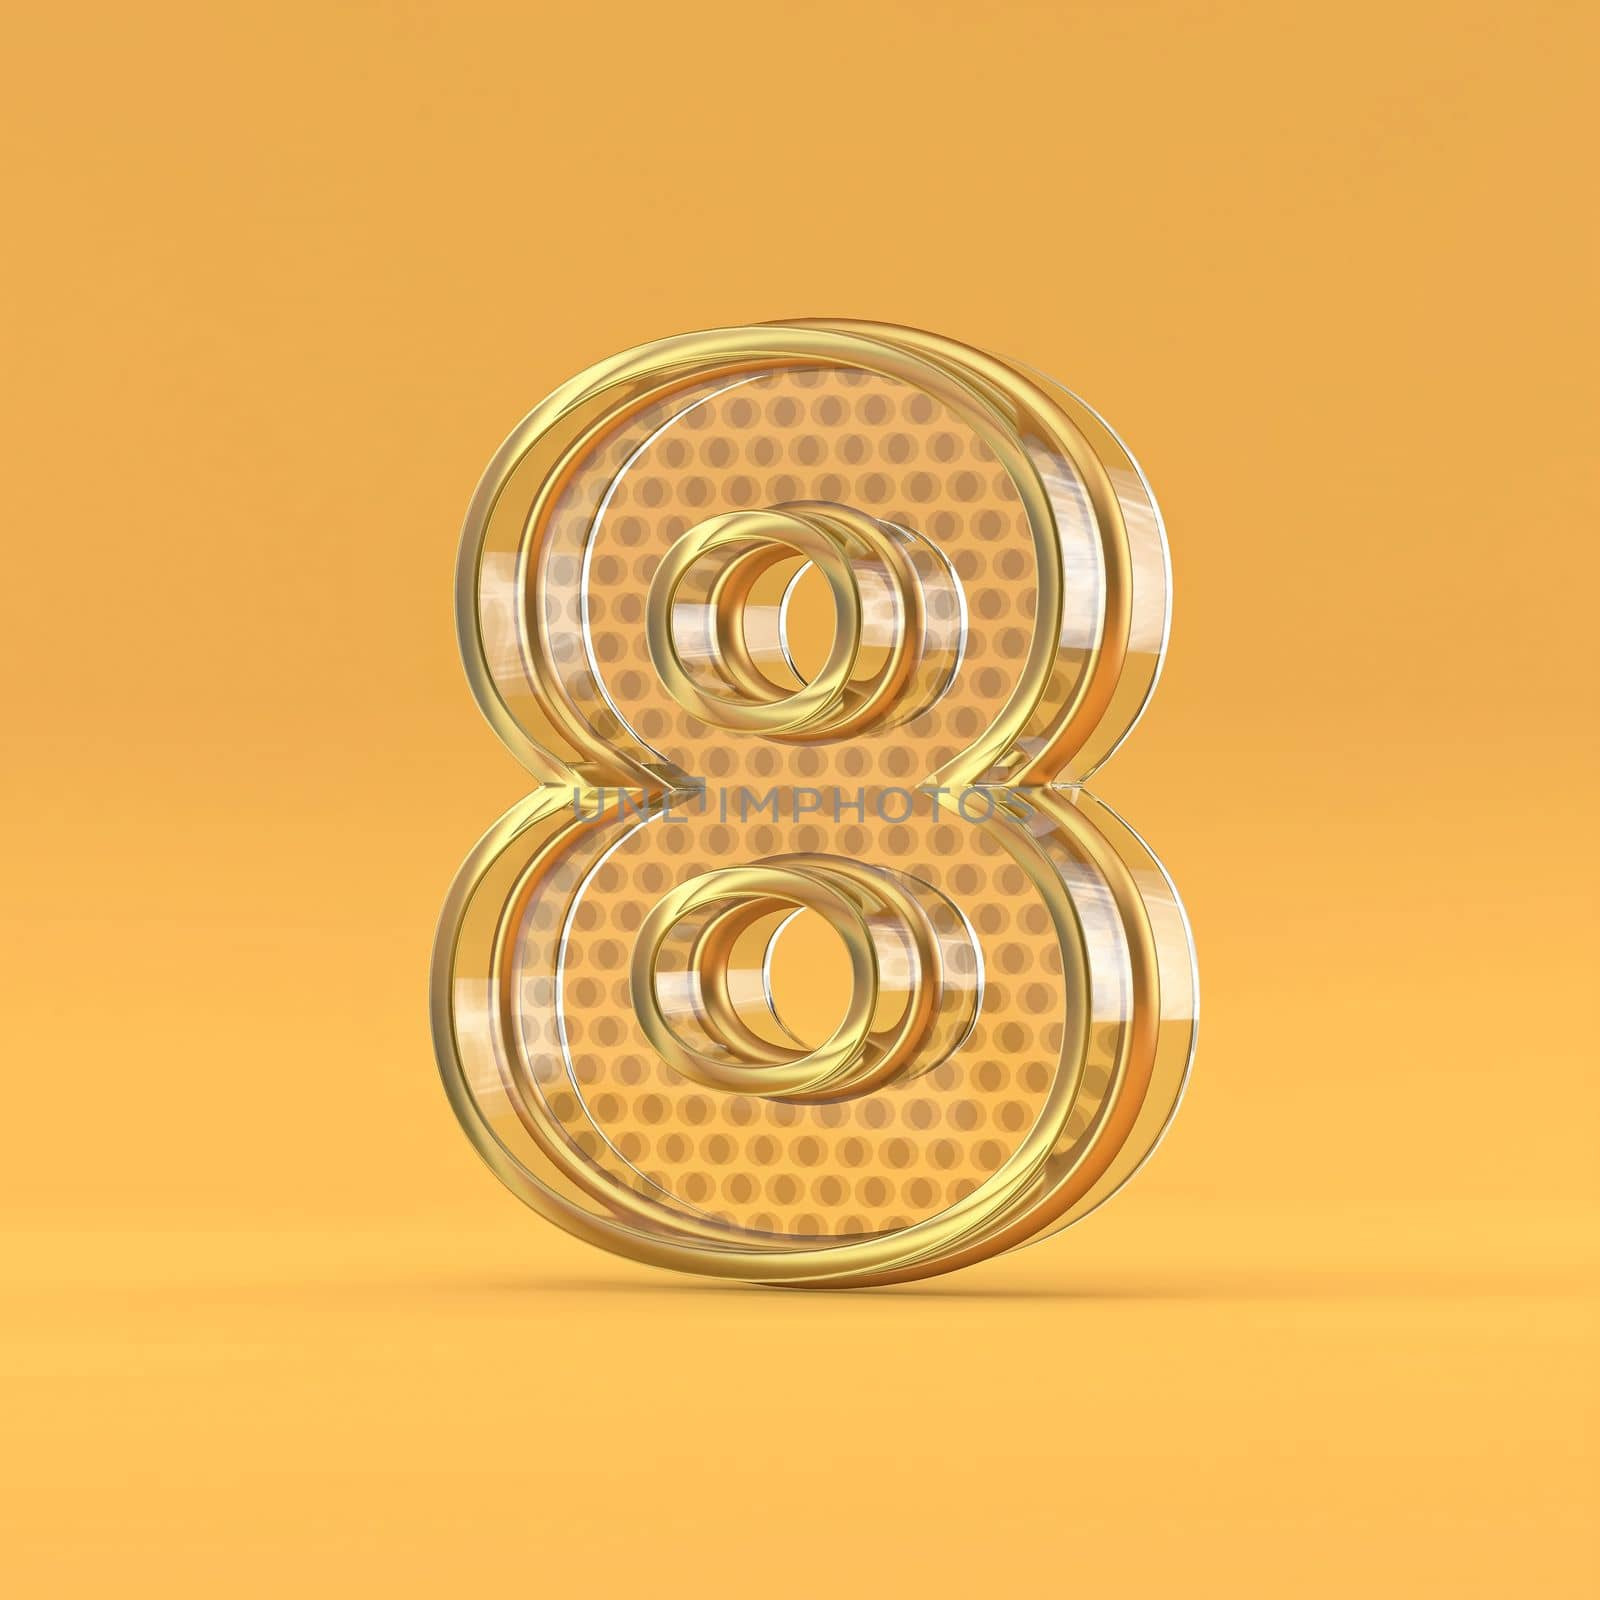 Gold wire and glass font Number 8 EIGHT 3D rendering illustration isolated on orange background